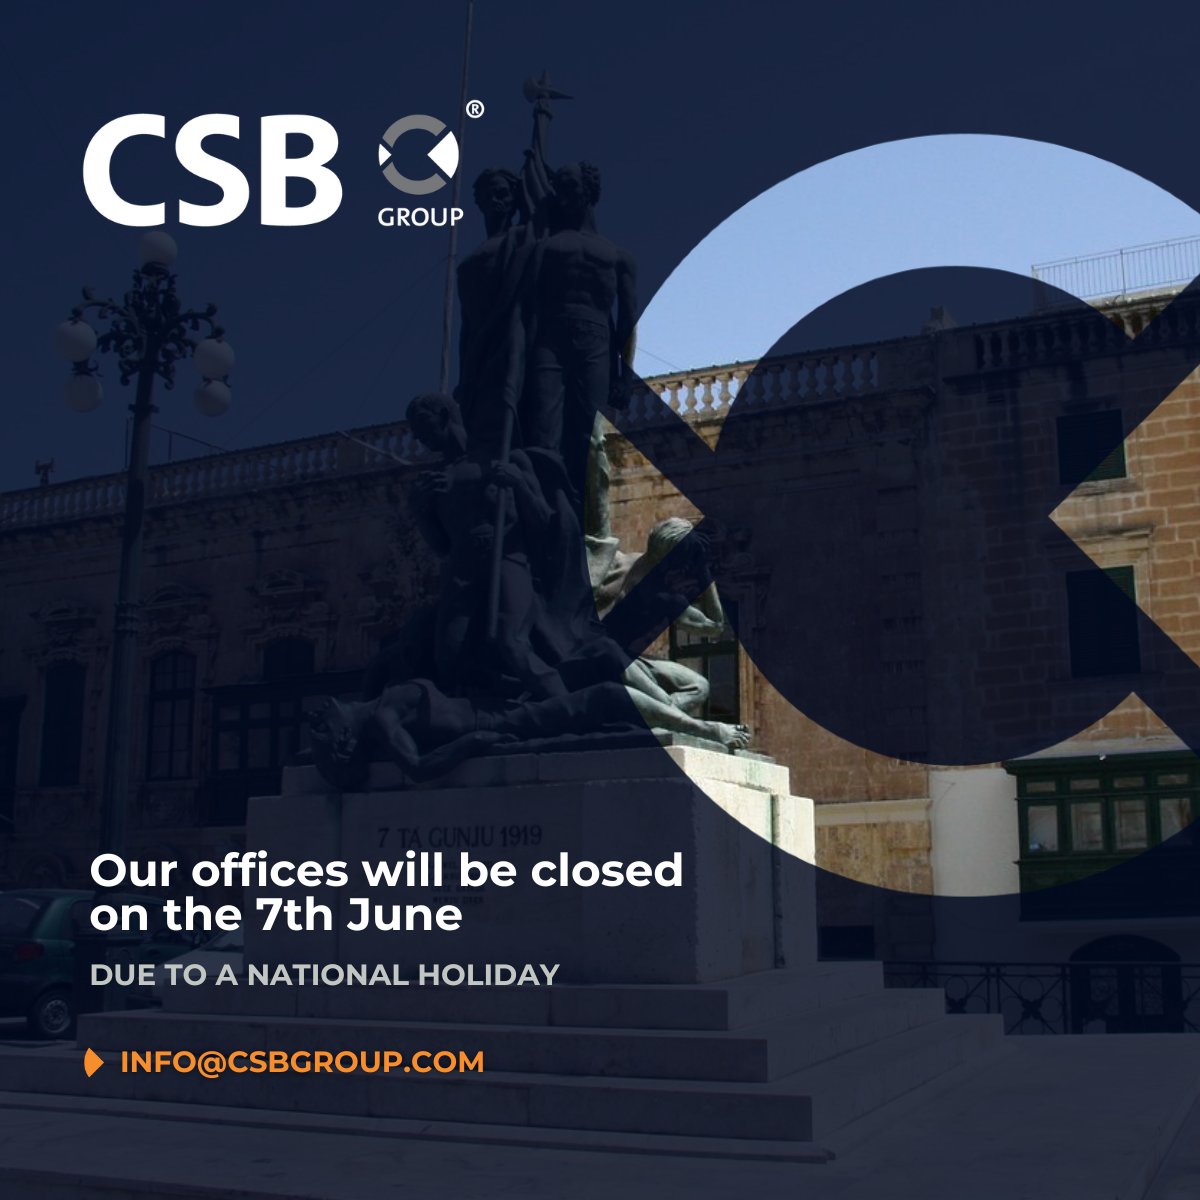 📅 Wednesday, the 7th of June is a #nationalholiday in #Malta and therefore, we will be taking a short break. We will be back to our offices on Thursday, the 8th of June 2023.

🔗 To obtain the list of National and Public Holidays in Malta please visit csbgroup.com/about-malta